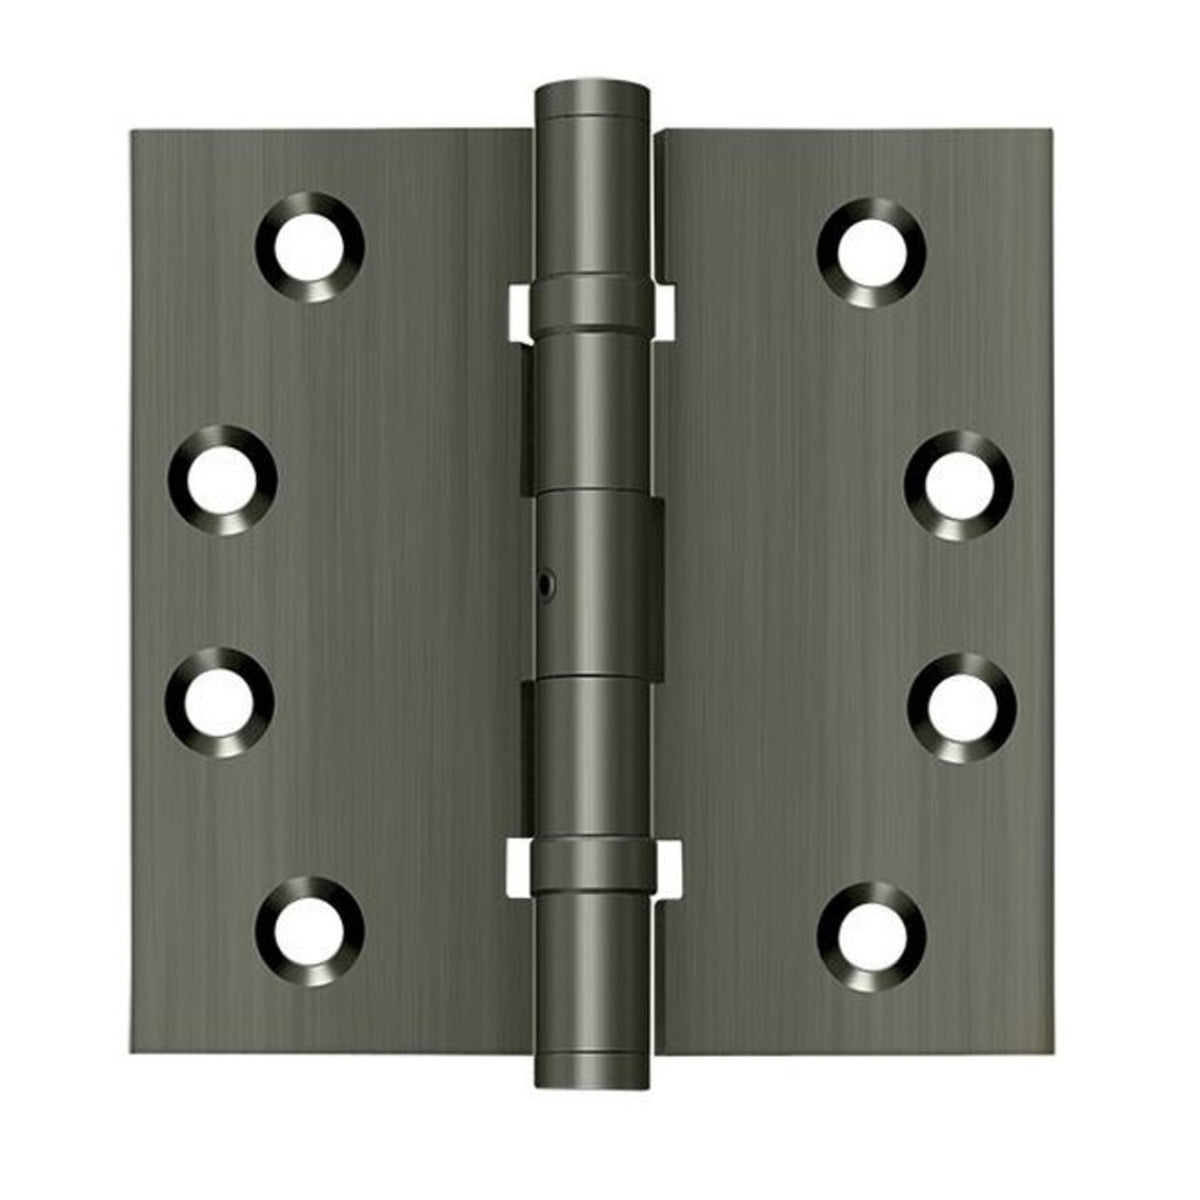 Deltana DSB4NB15A Ball Bearings Square Hinge, Antique Nickel